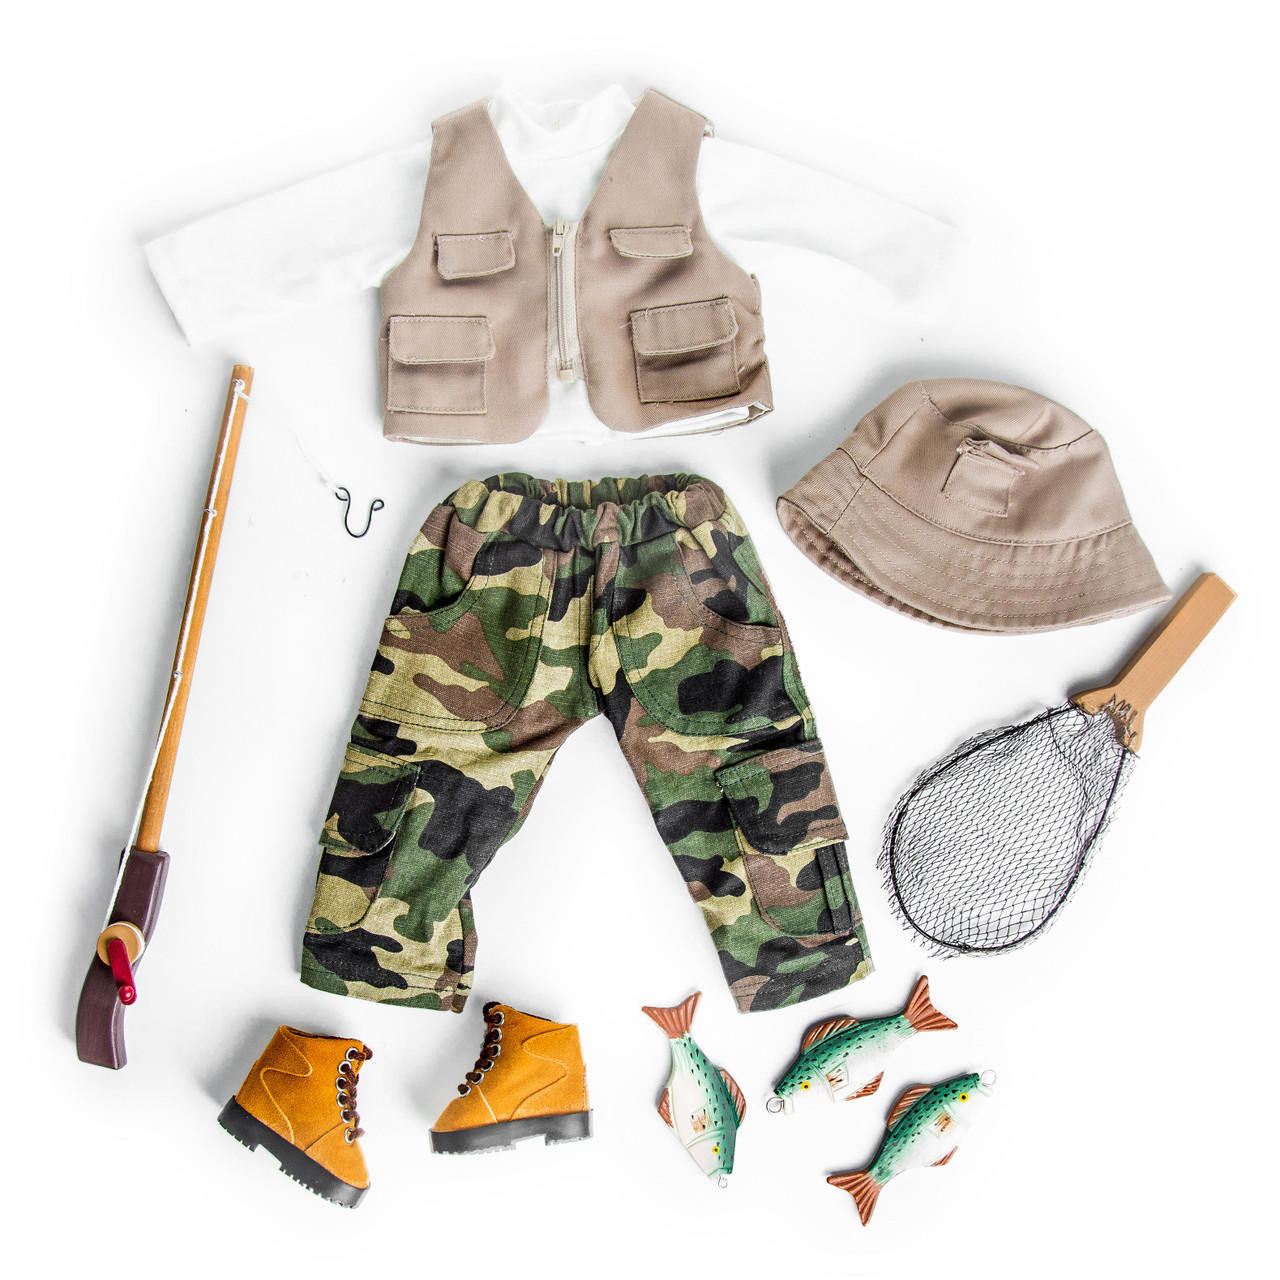 https://cdn11.bigcommerce.com/s-m5vcu70215/images/stencil/1280x1280/products/159/1921/the-queens-treasures-ships-october-2023-11-piece-fishing-adventure-outfit-clothes-and-accessories-for-18-inch-dolls__30649.1692299308.jpg?c=1